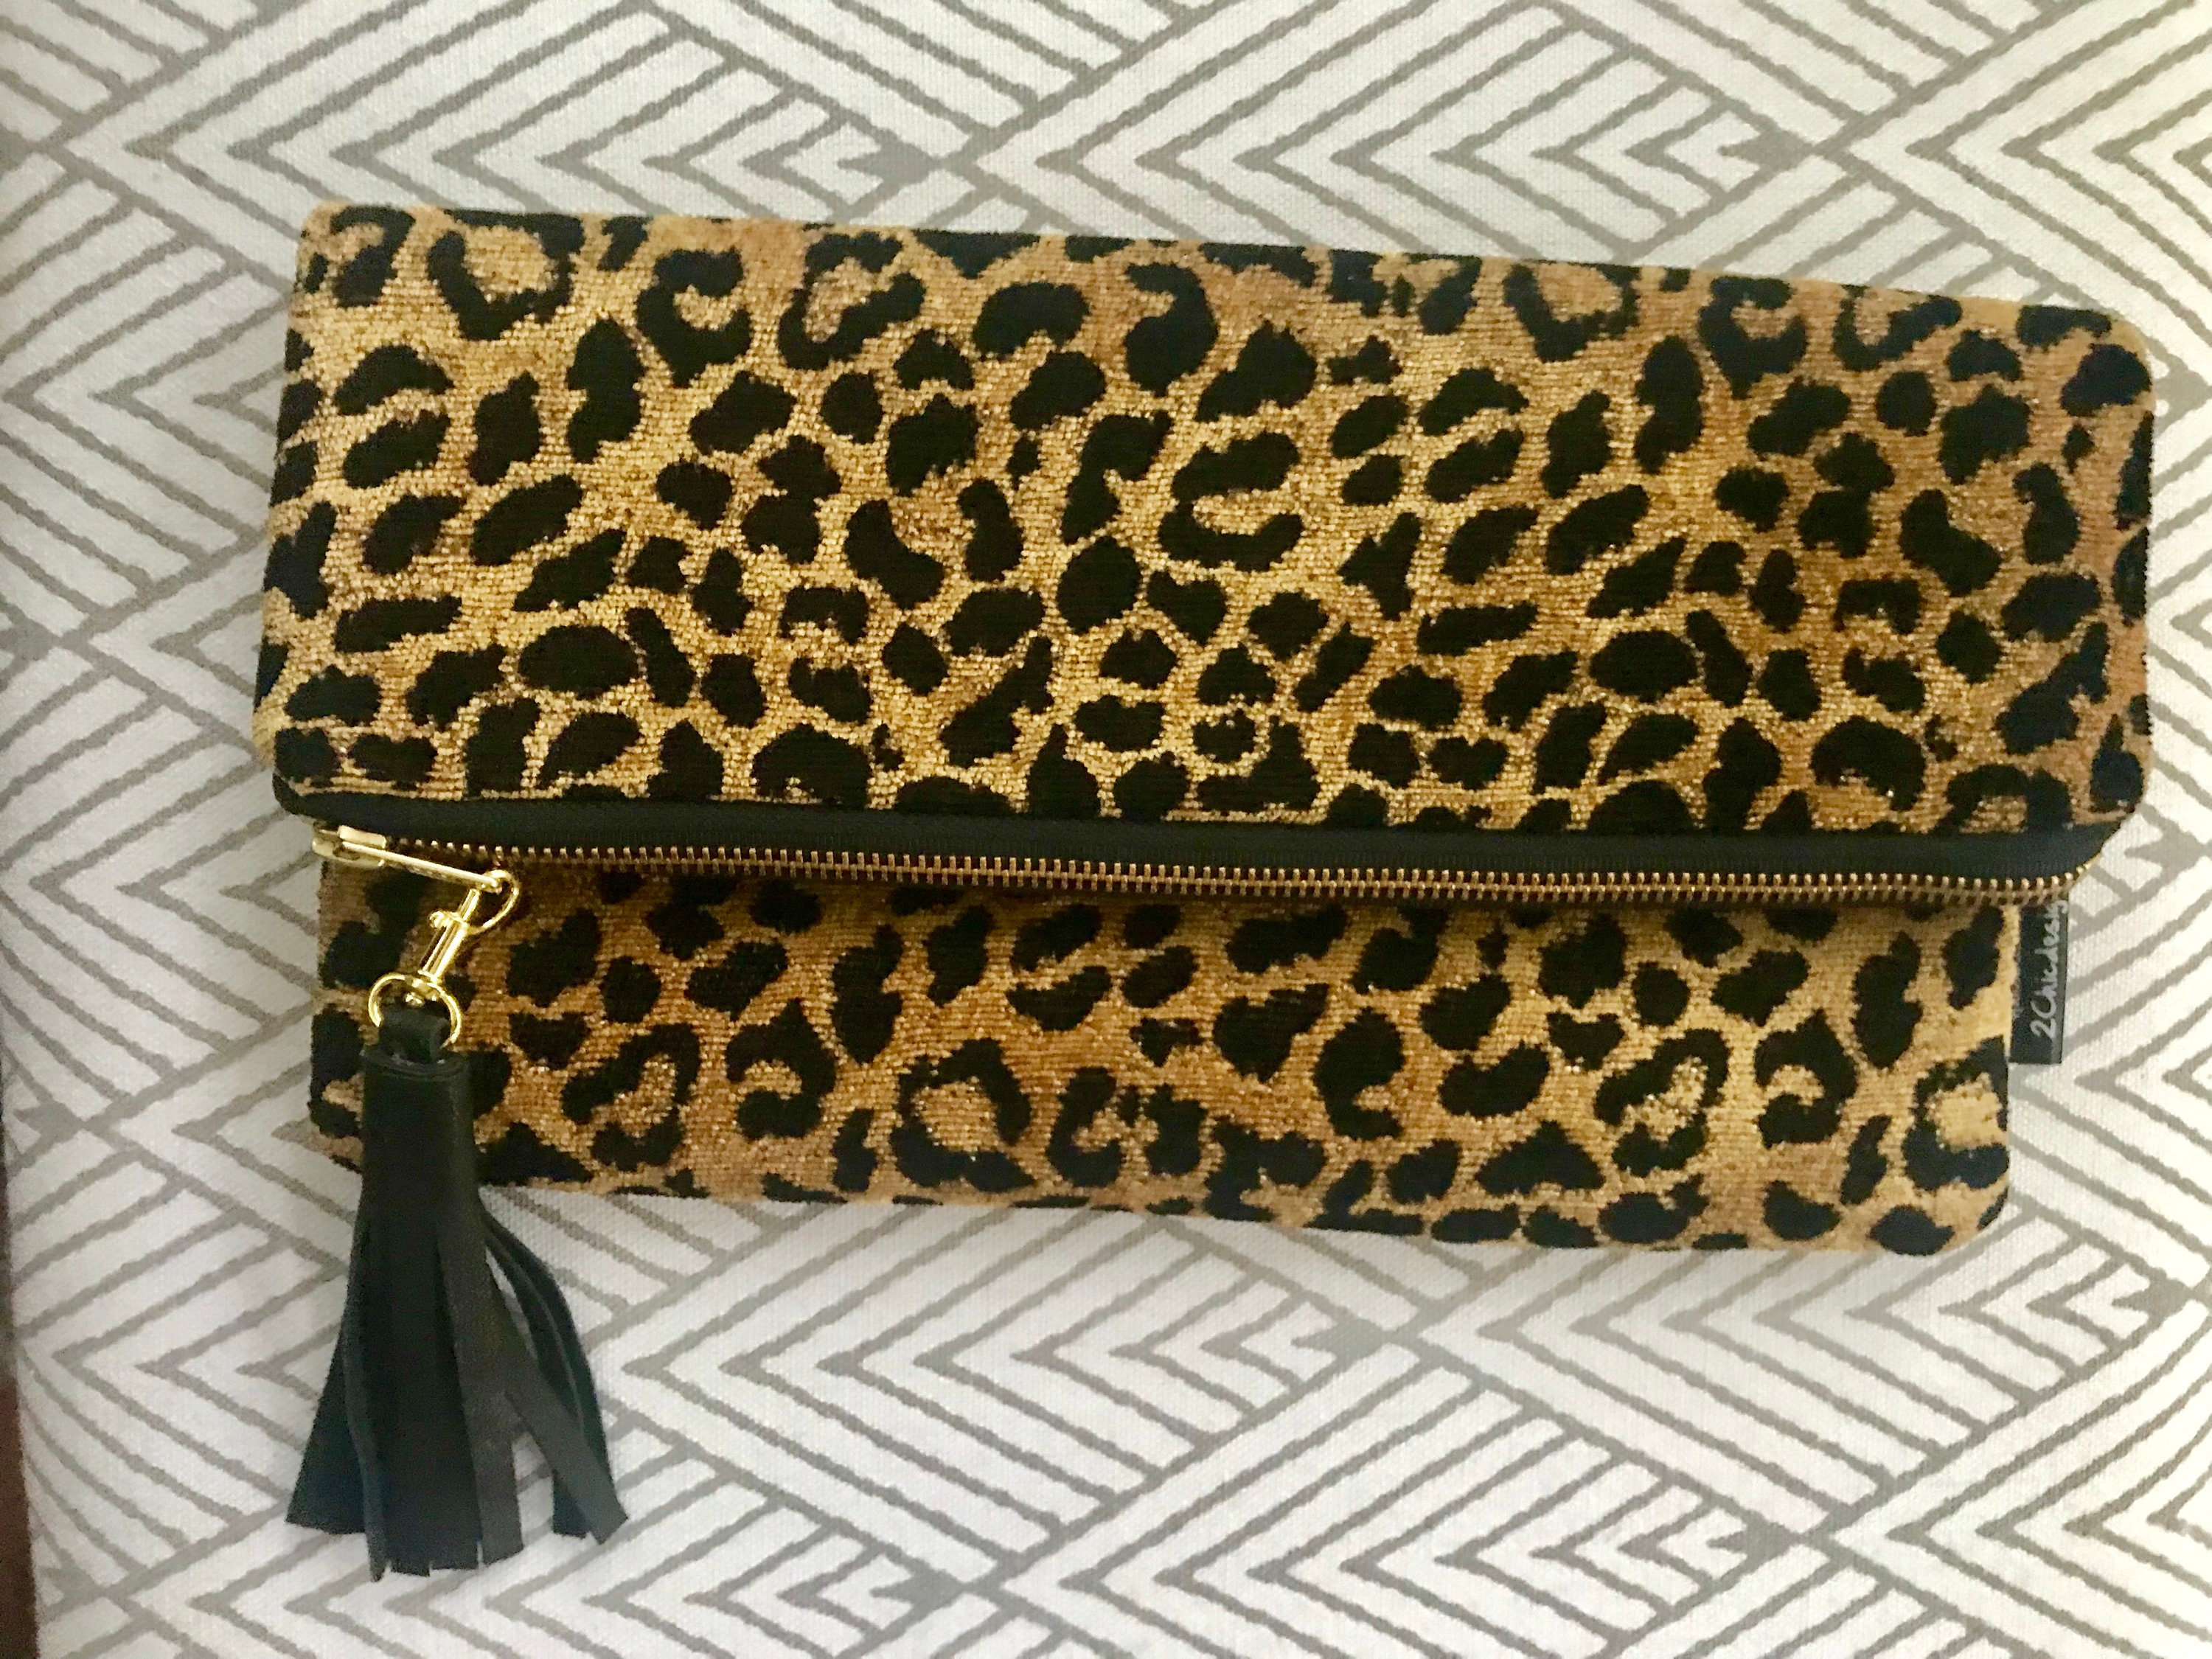 Hair on Hide Leopard and Leather Crossbody Bag Geronimo 7912 